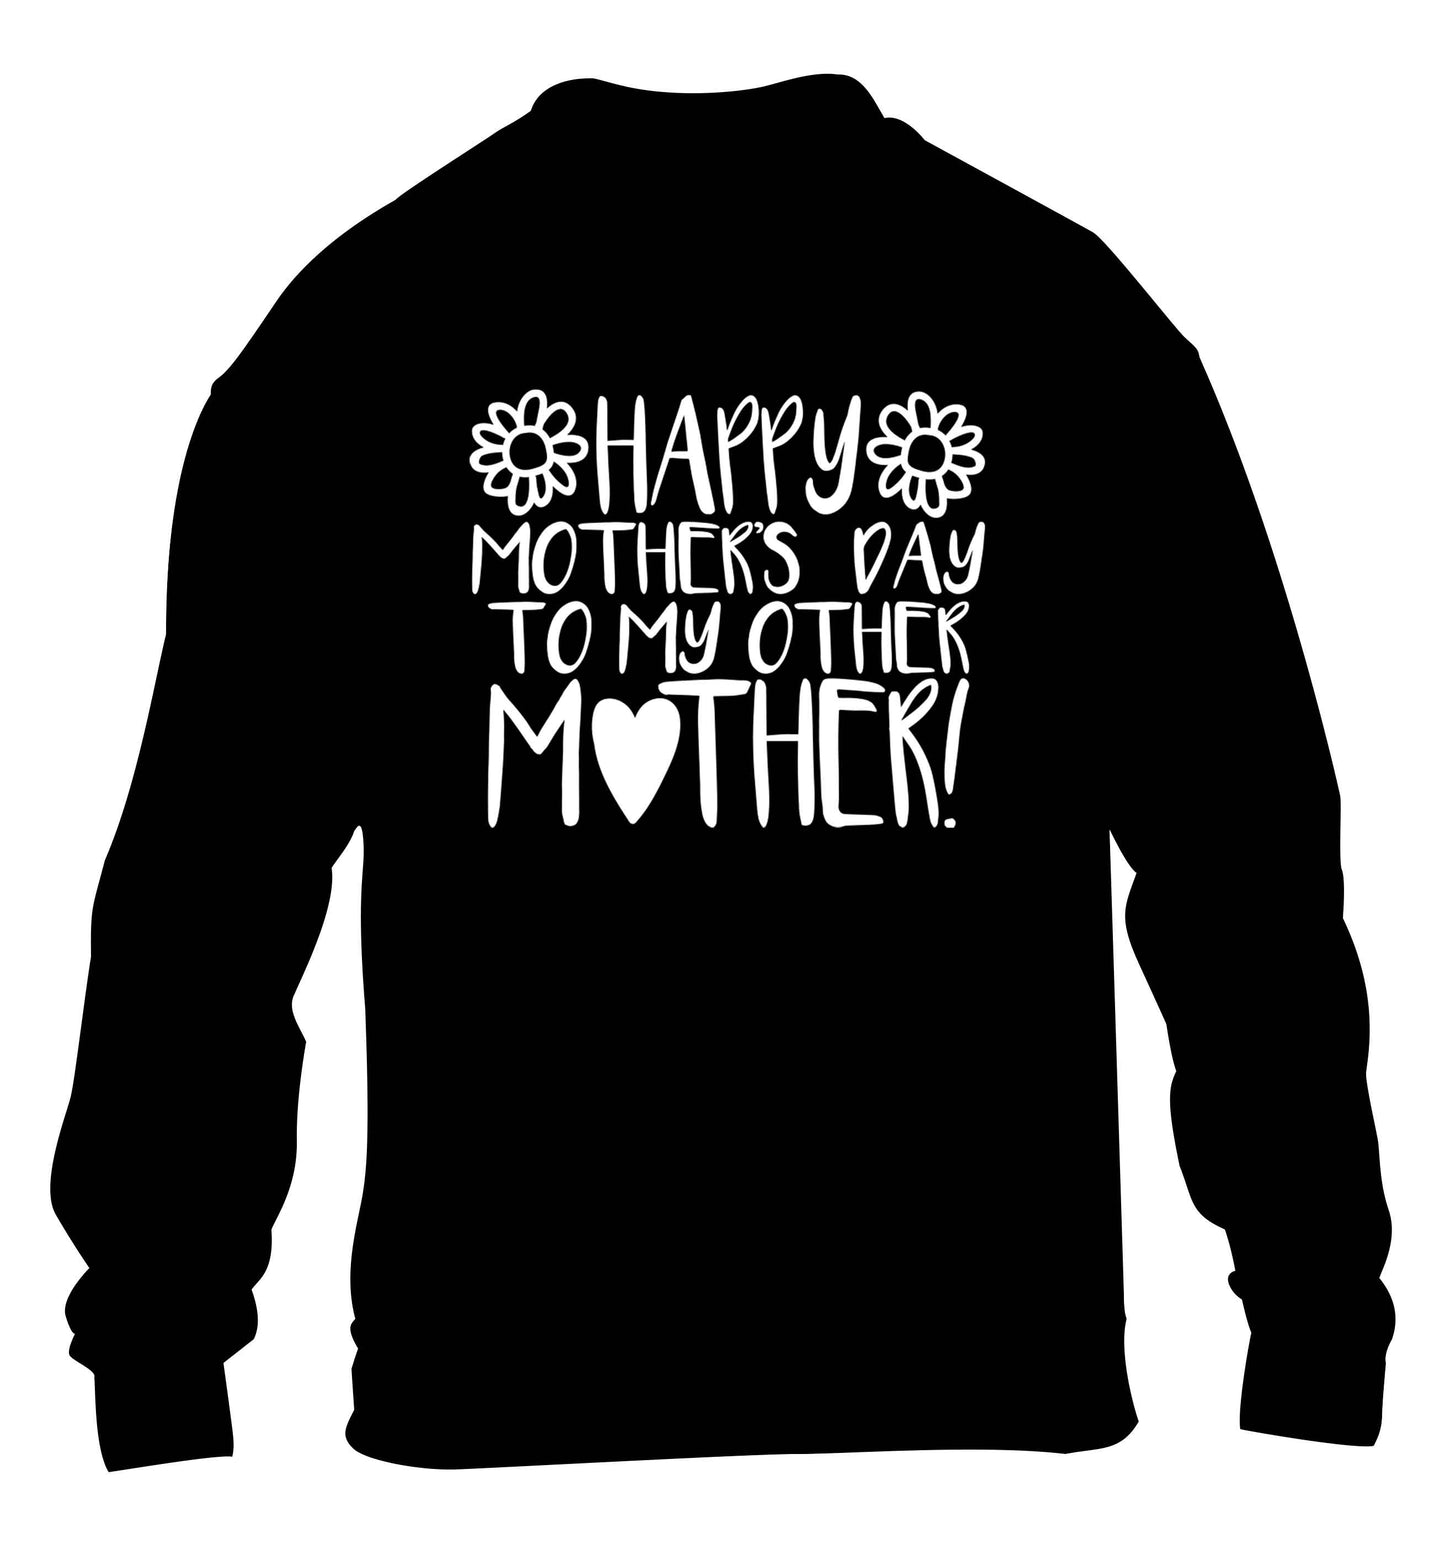 Happy mother's day to my other mother children's black sweater 12-13 Years